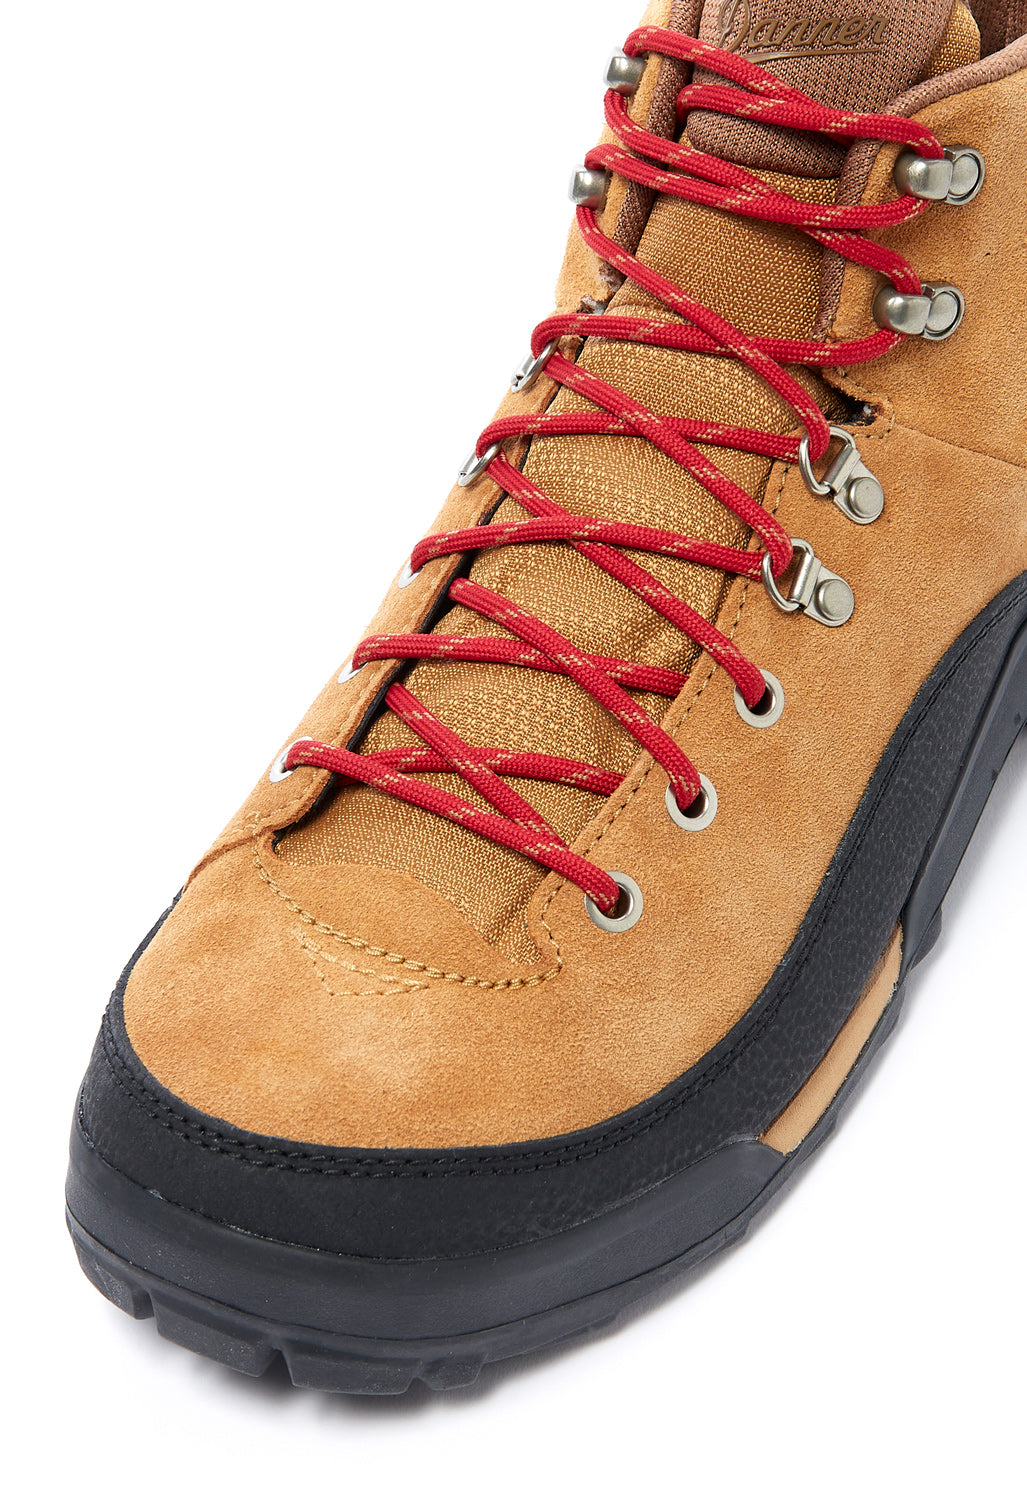 Danner Men's Panorama Mid Boots - Brown / Red